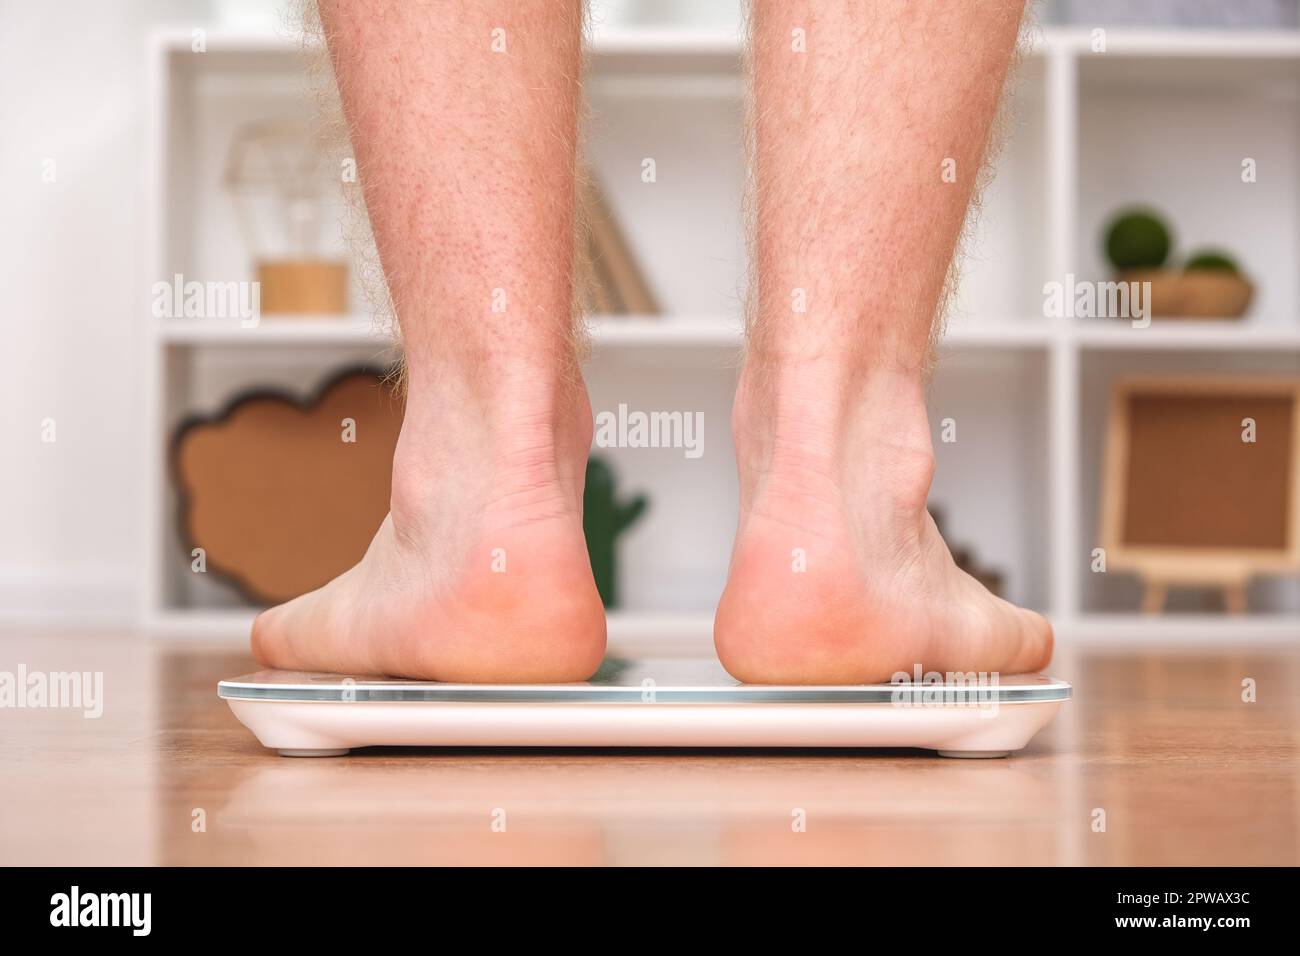 https://c8.alamy.com/comp/2PWAX3C/a-man-stands-on-the-scales-the-guy-is-weighing-himself-floor-scales-for-health-weight-control-2PWAX3C.jpg